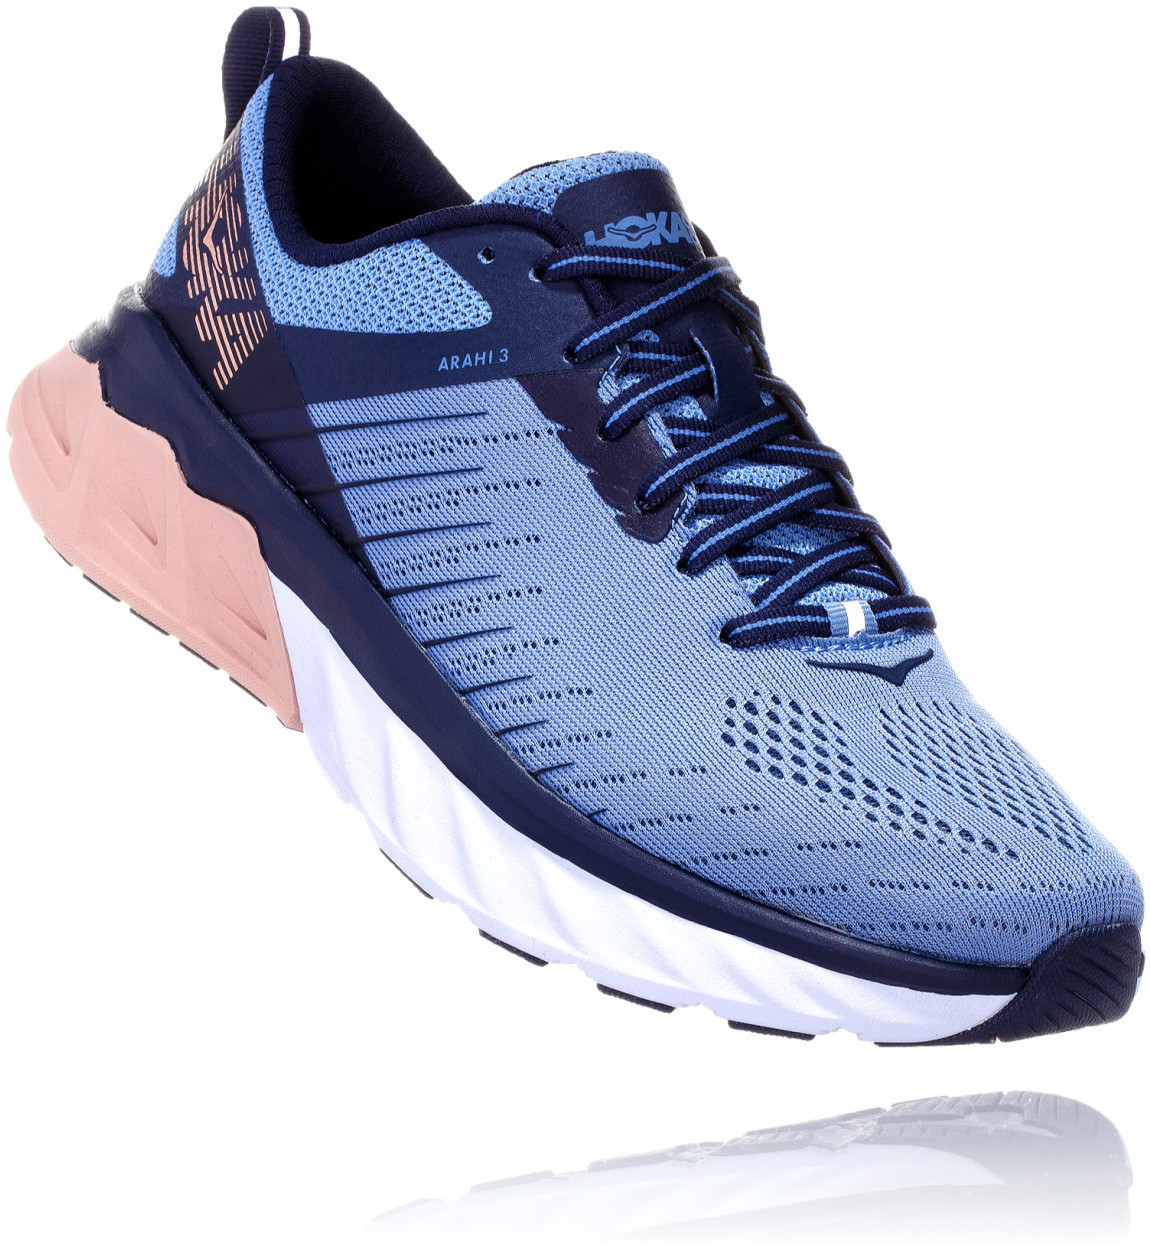 Buy Hoka One One Arahi 3 Women from £115.00 (Today) – Best Deals on ...